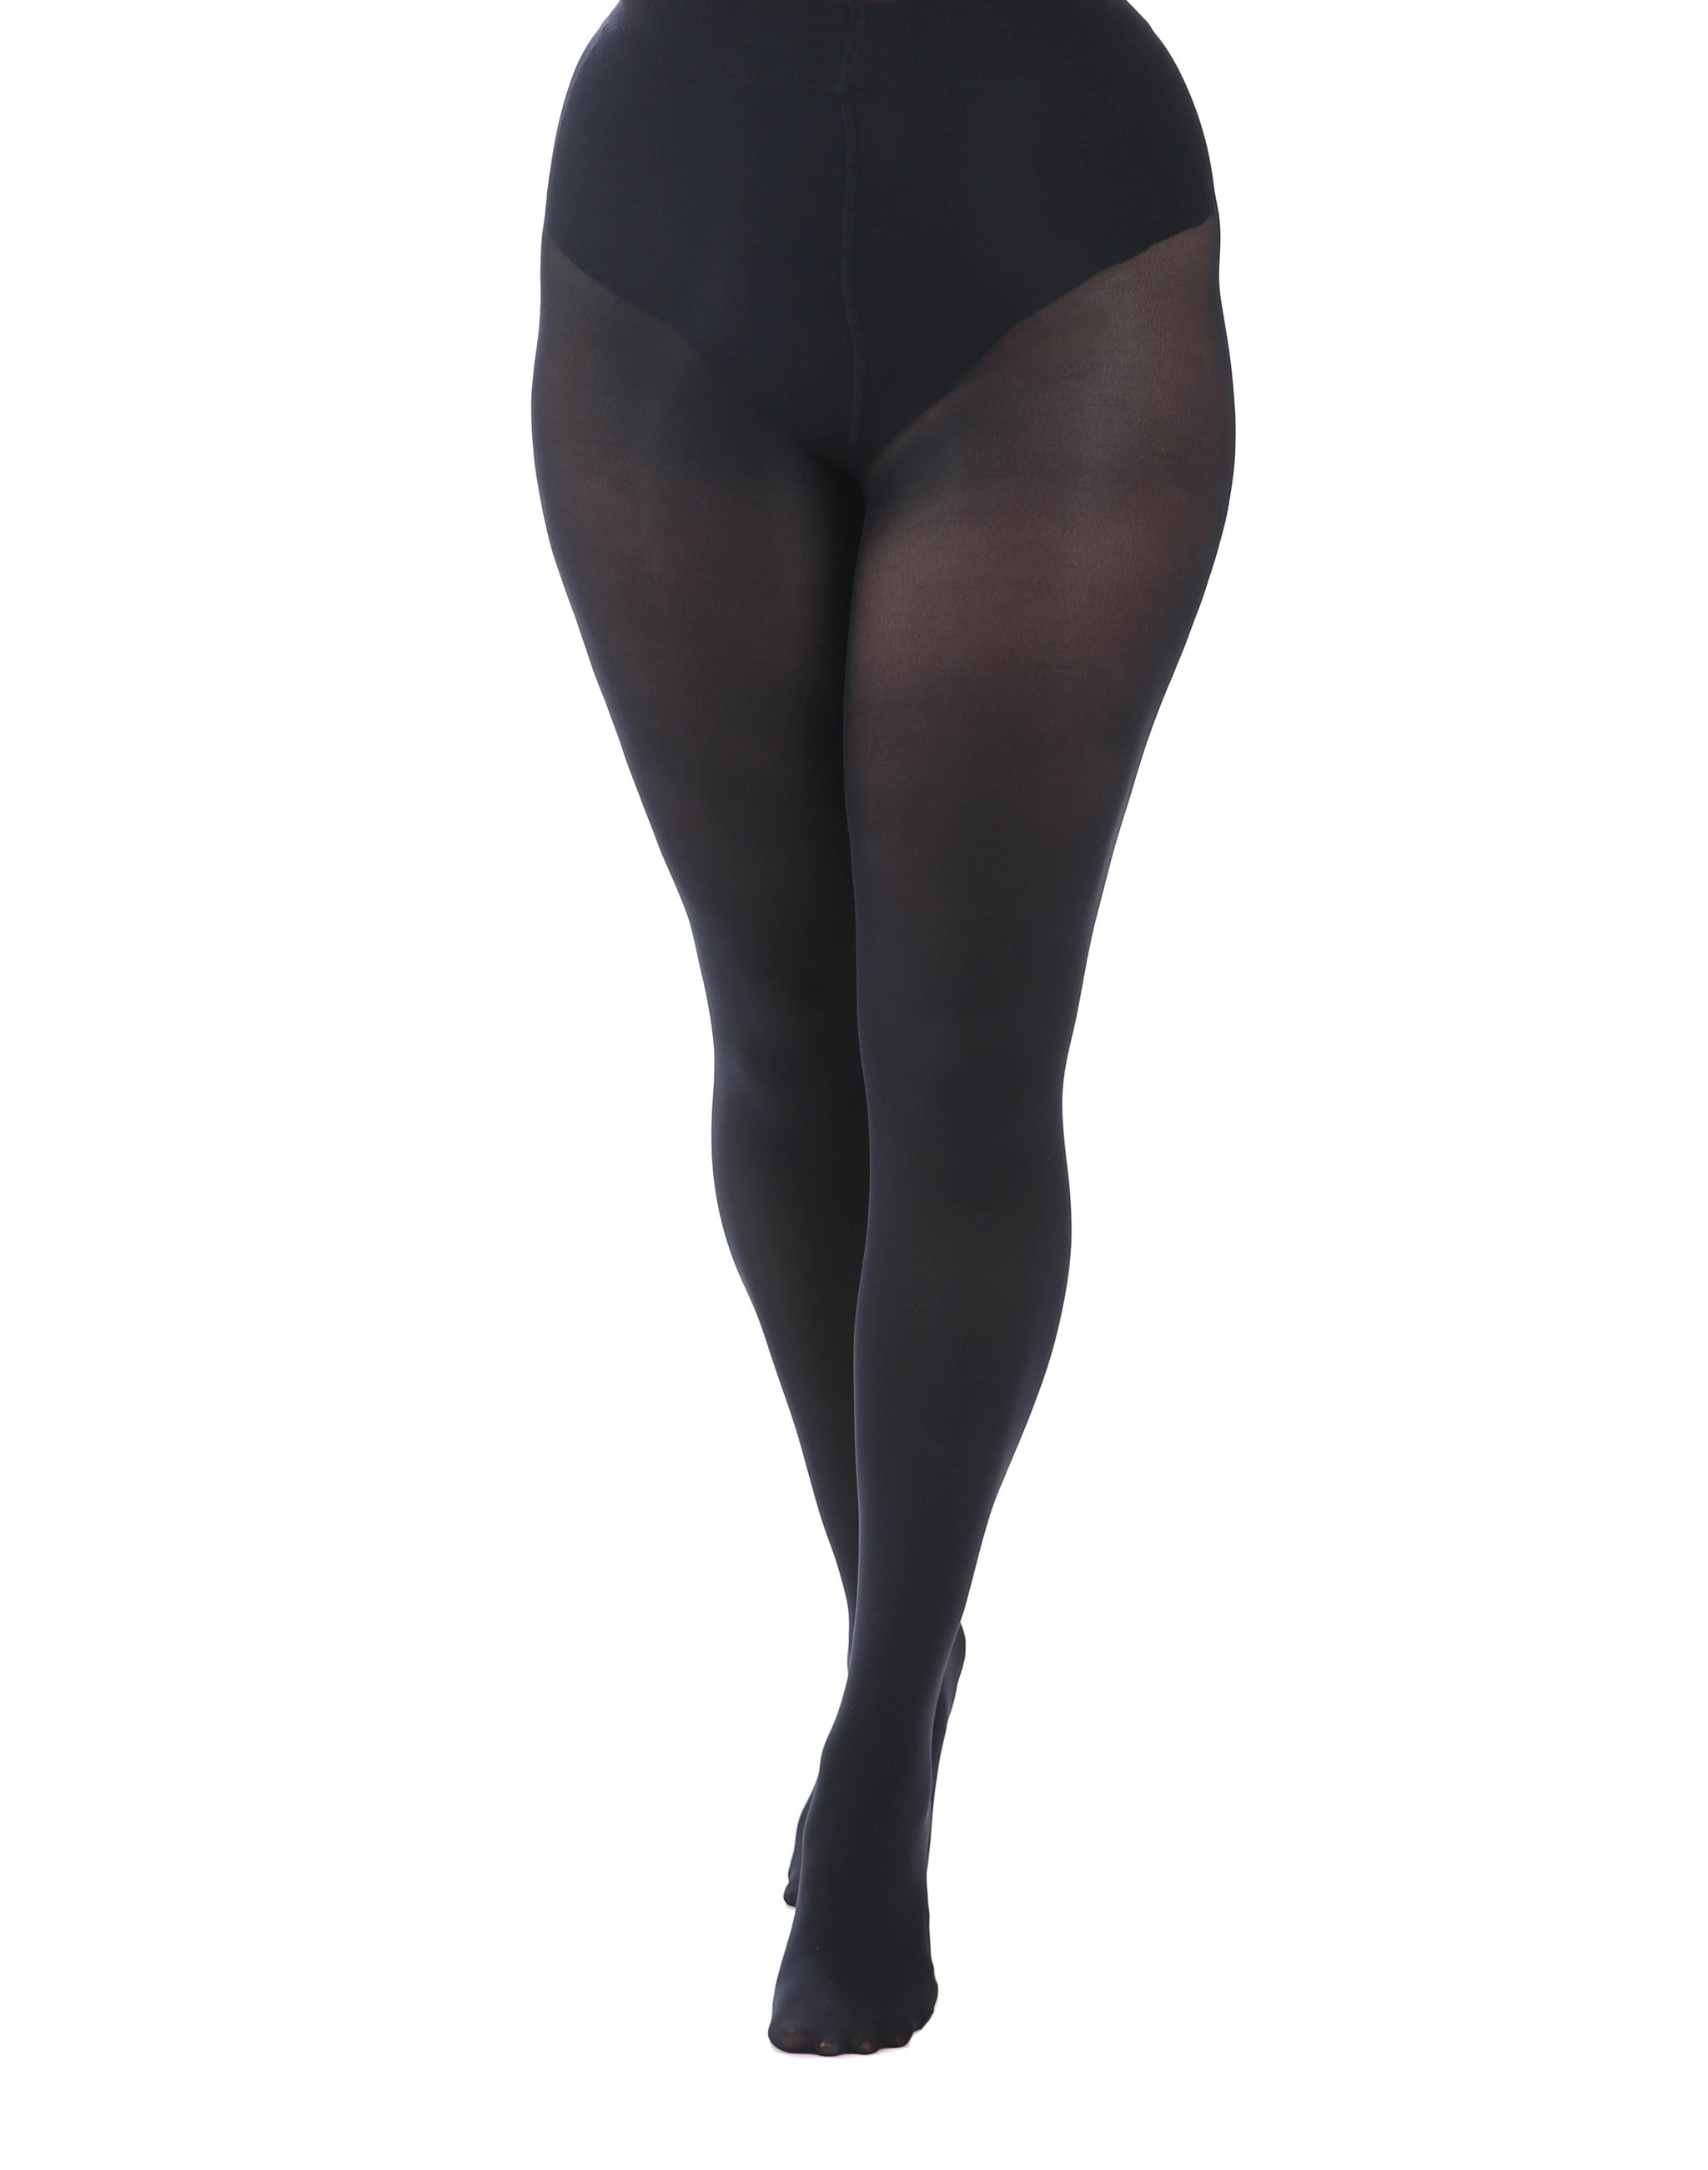 Opaque Tights with Gaiter Effect 80